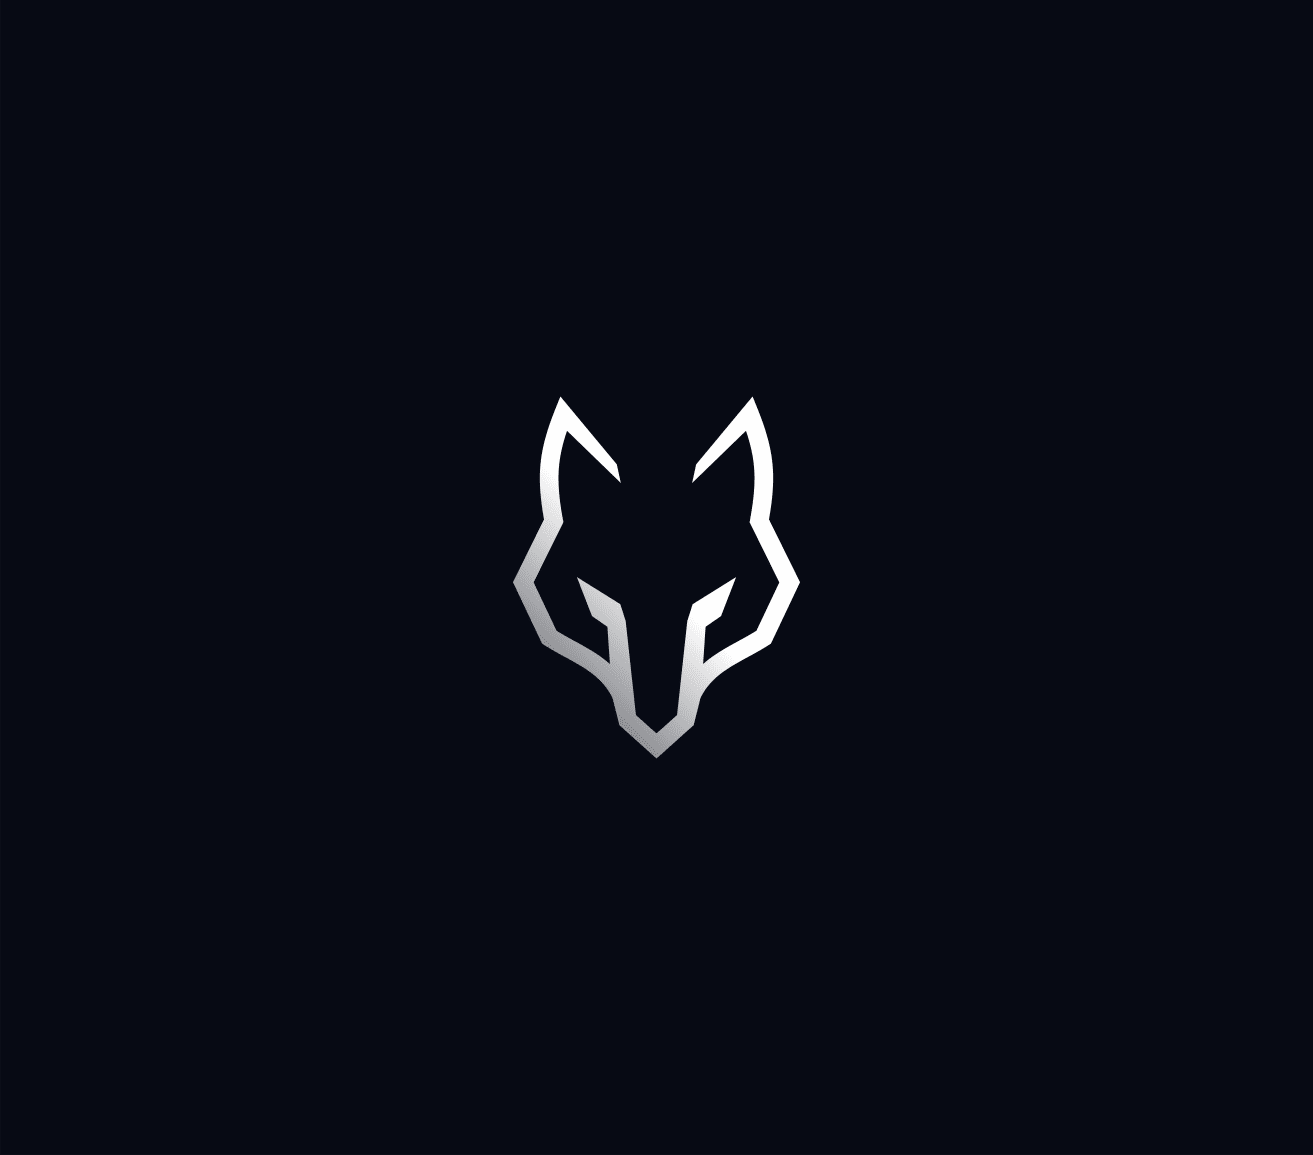 Design a stoic wolf logo that represents humble strength, but